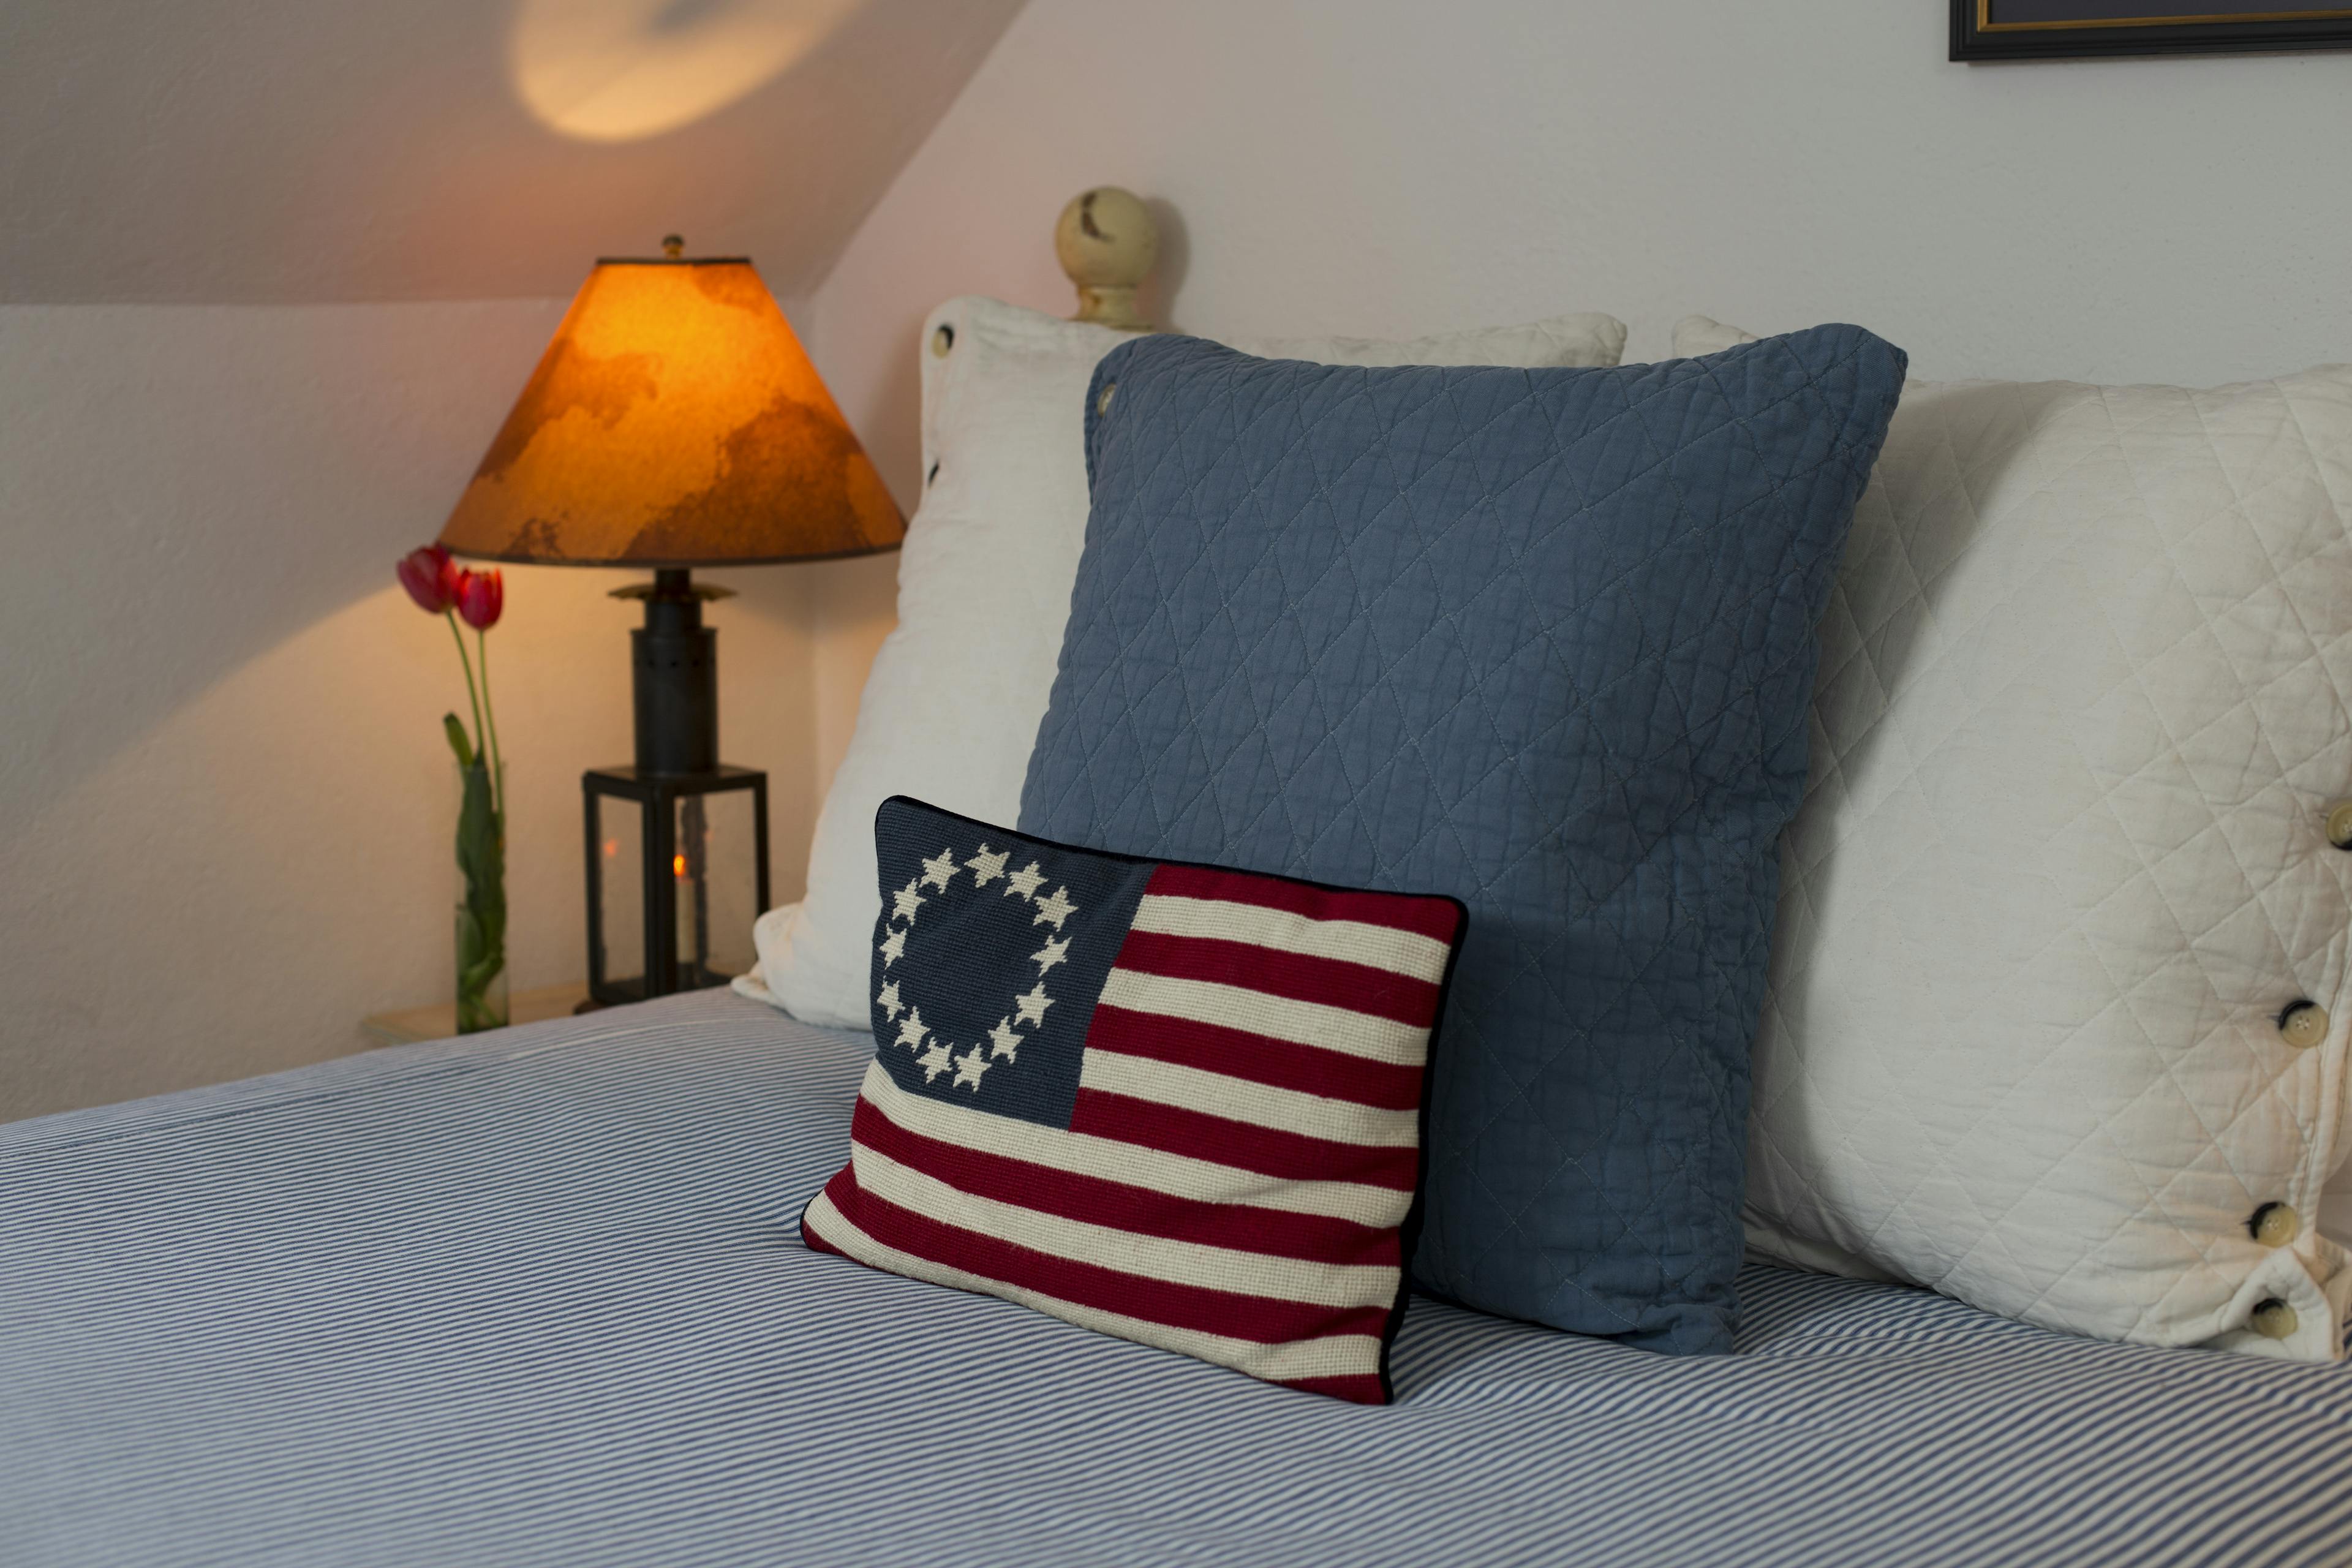 Close up of head of bed with blue & white throw pillows and a decorative colonial flag pillow, nightstand with lamp